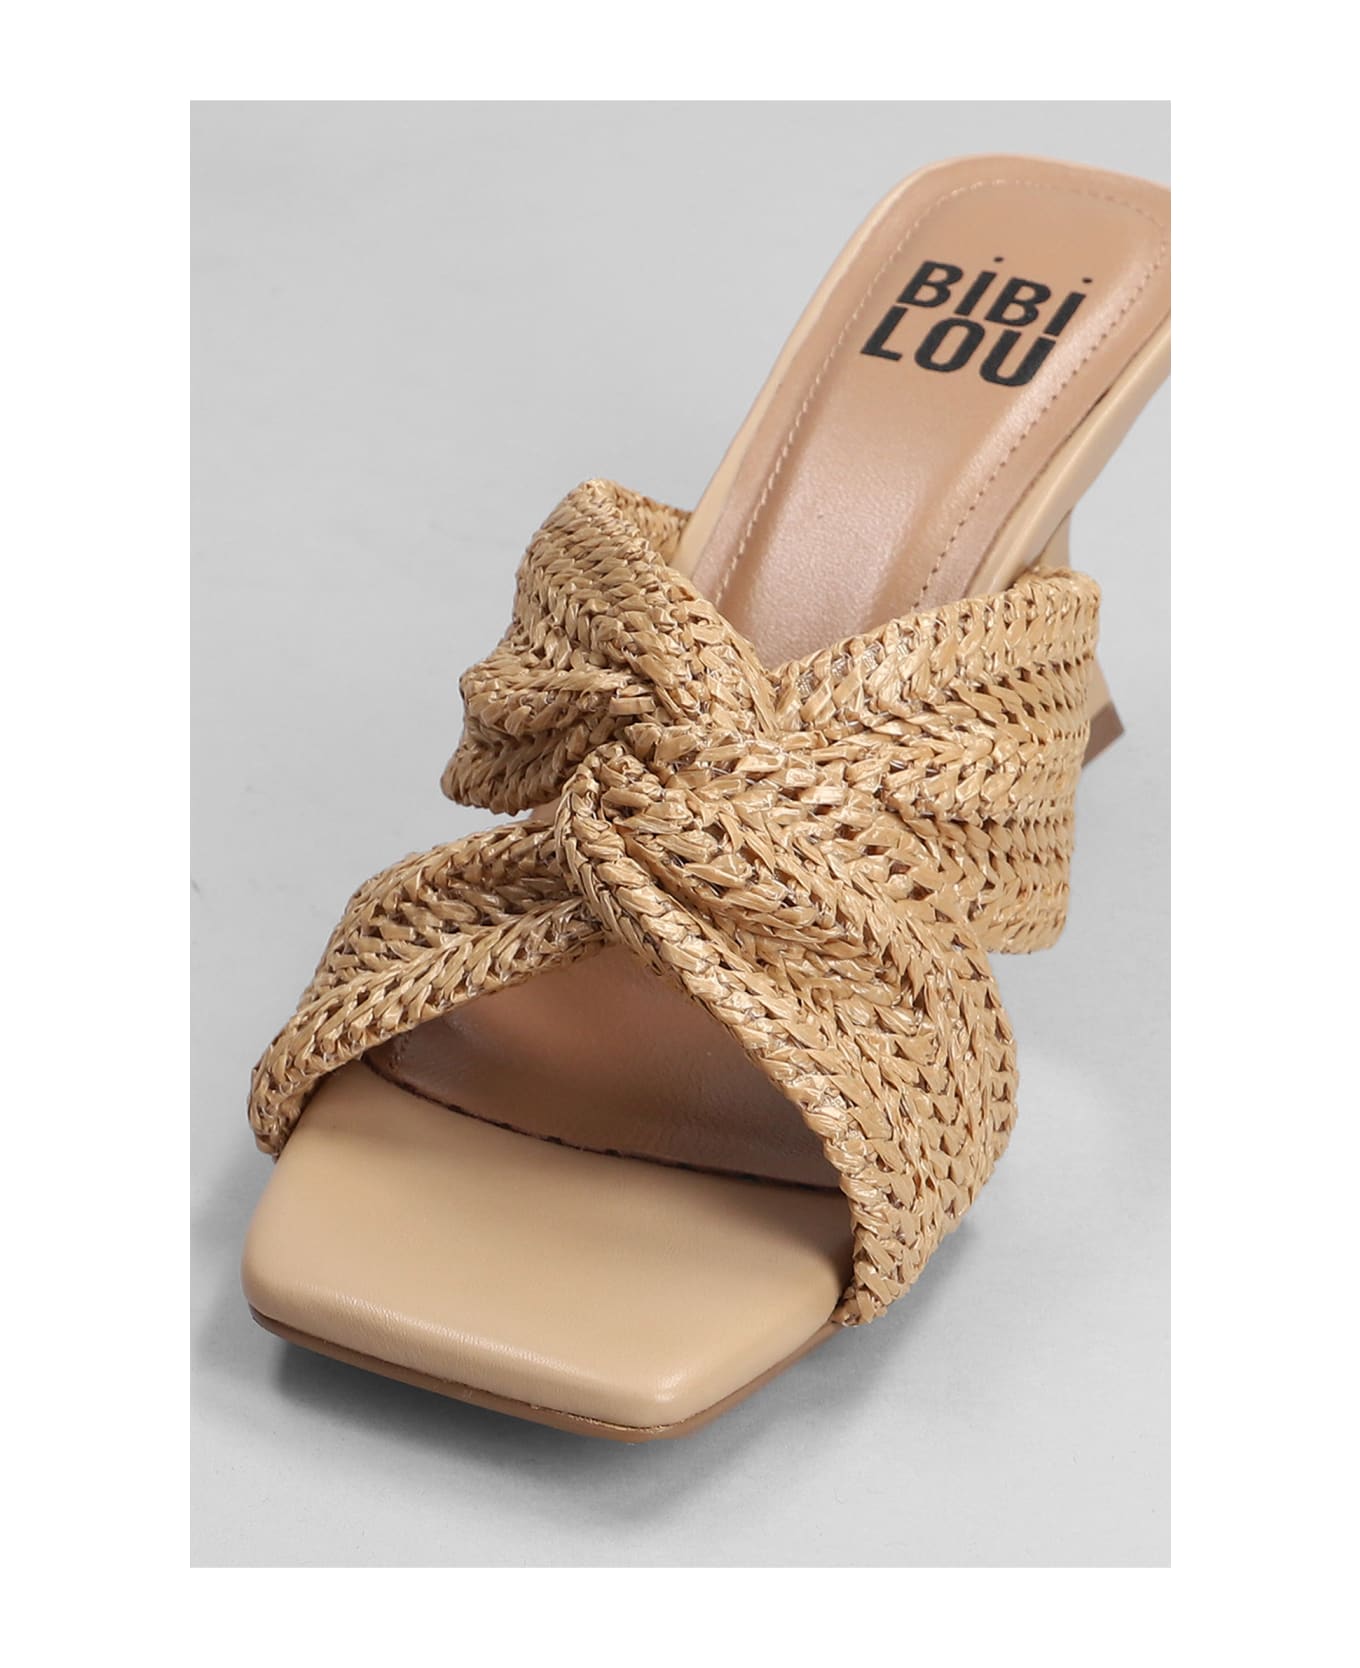 Bibi Lou Sandals In Leather Color Synthetic Fibers - leather color